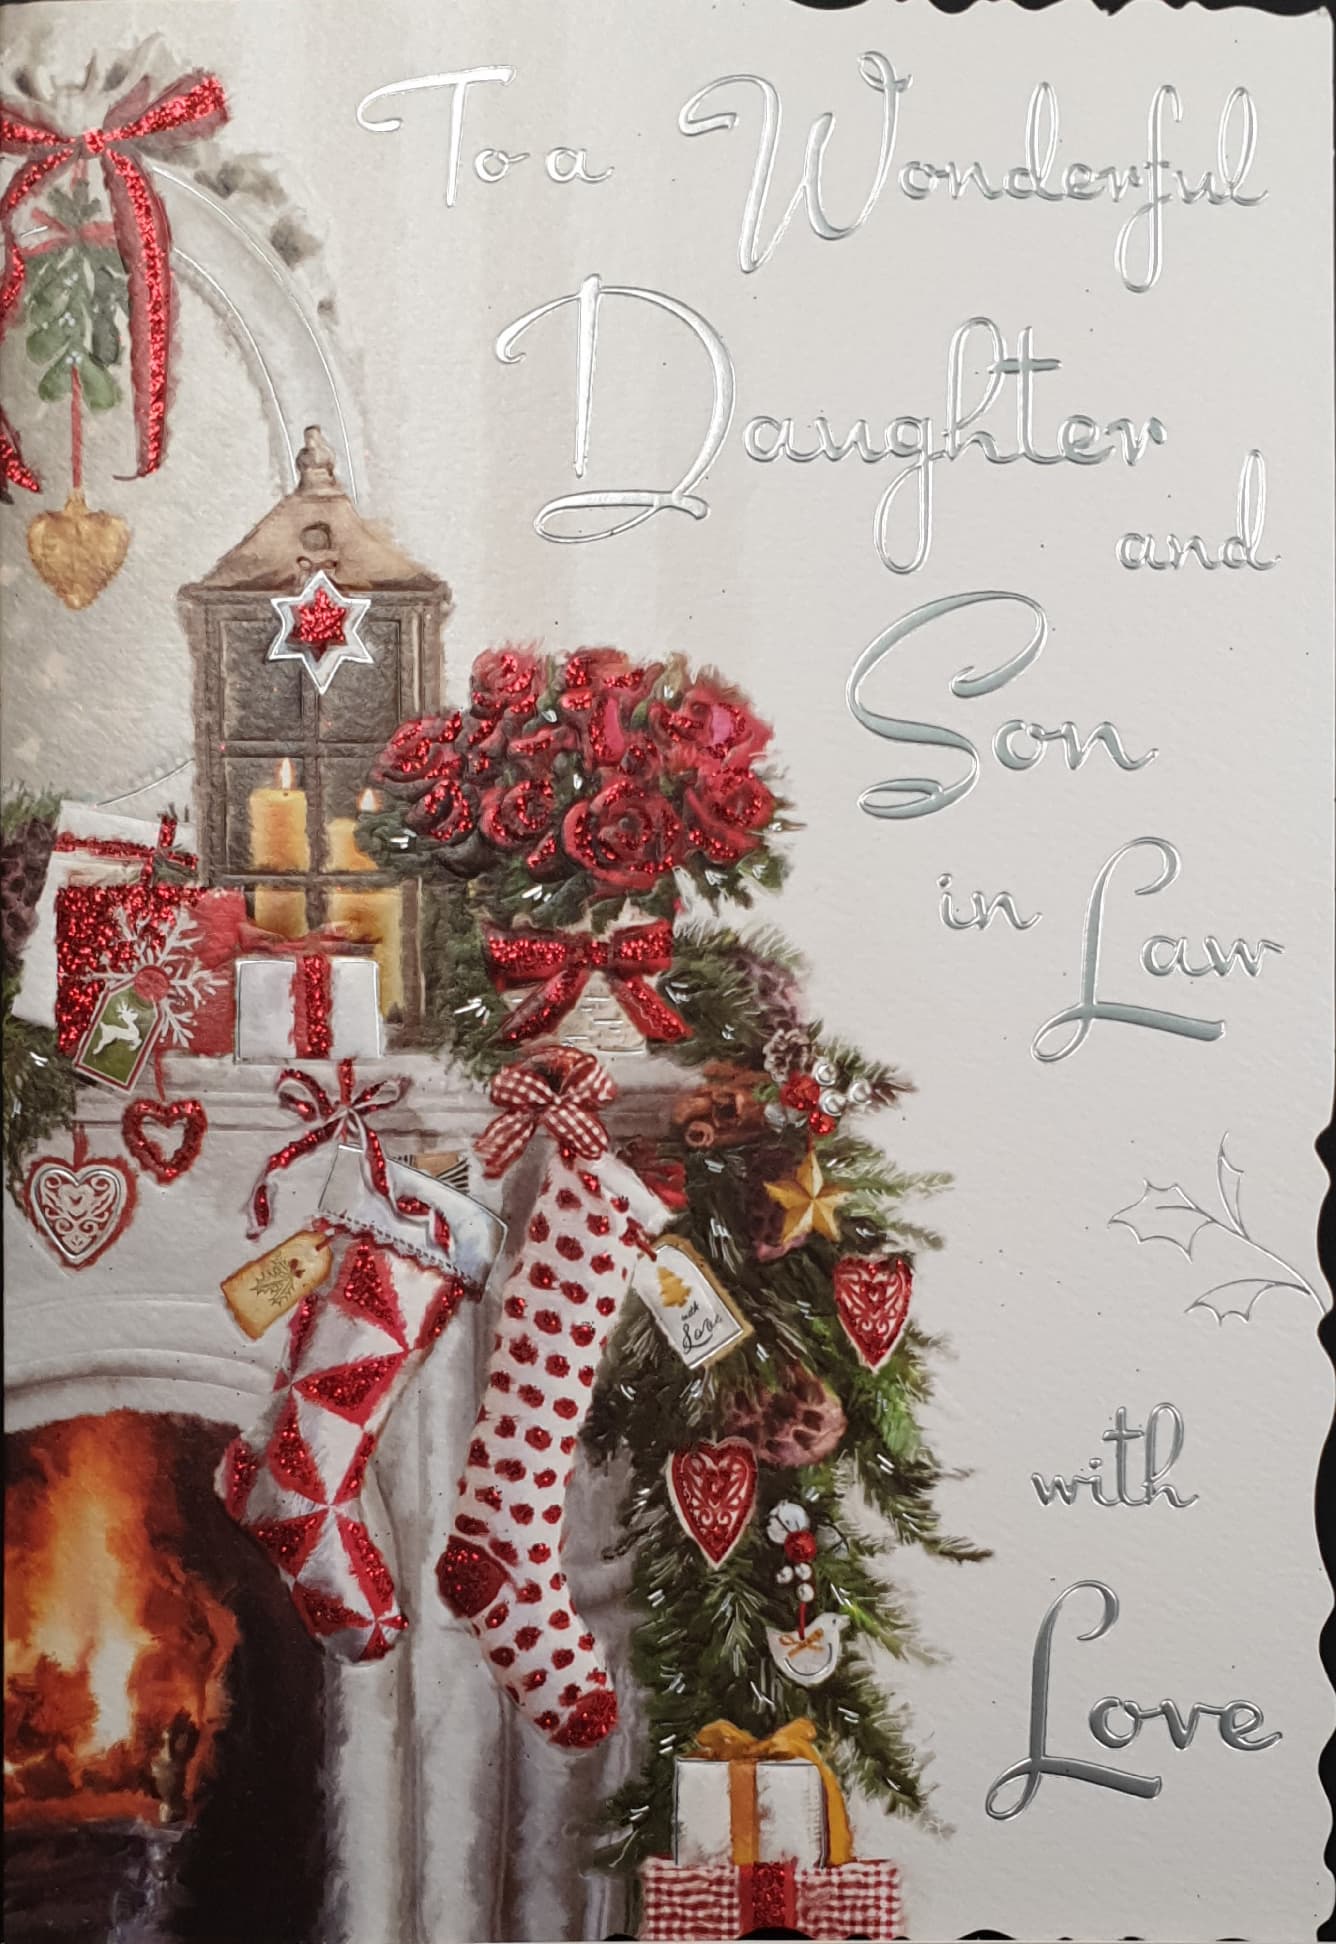 Daughter & Son in Law Christmas Card - Roses & Christmas Stockings on Mantelpiece